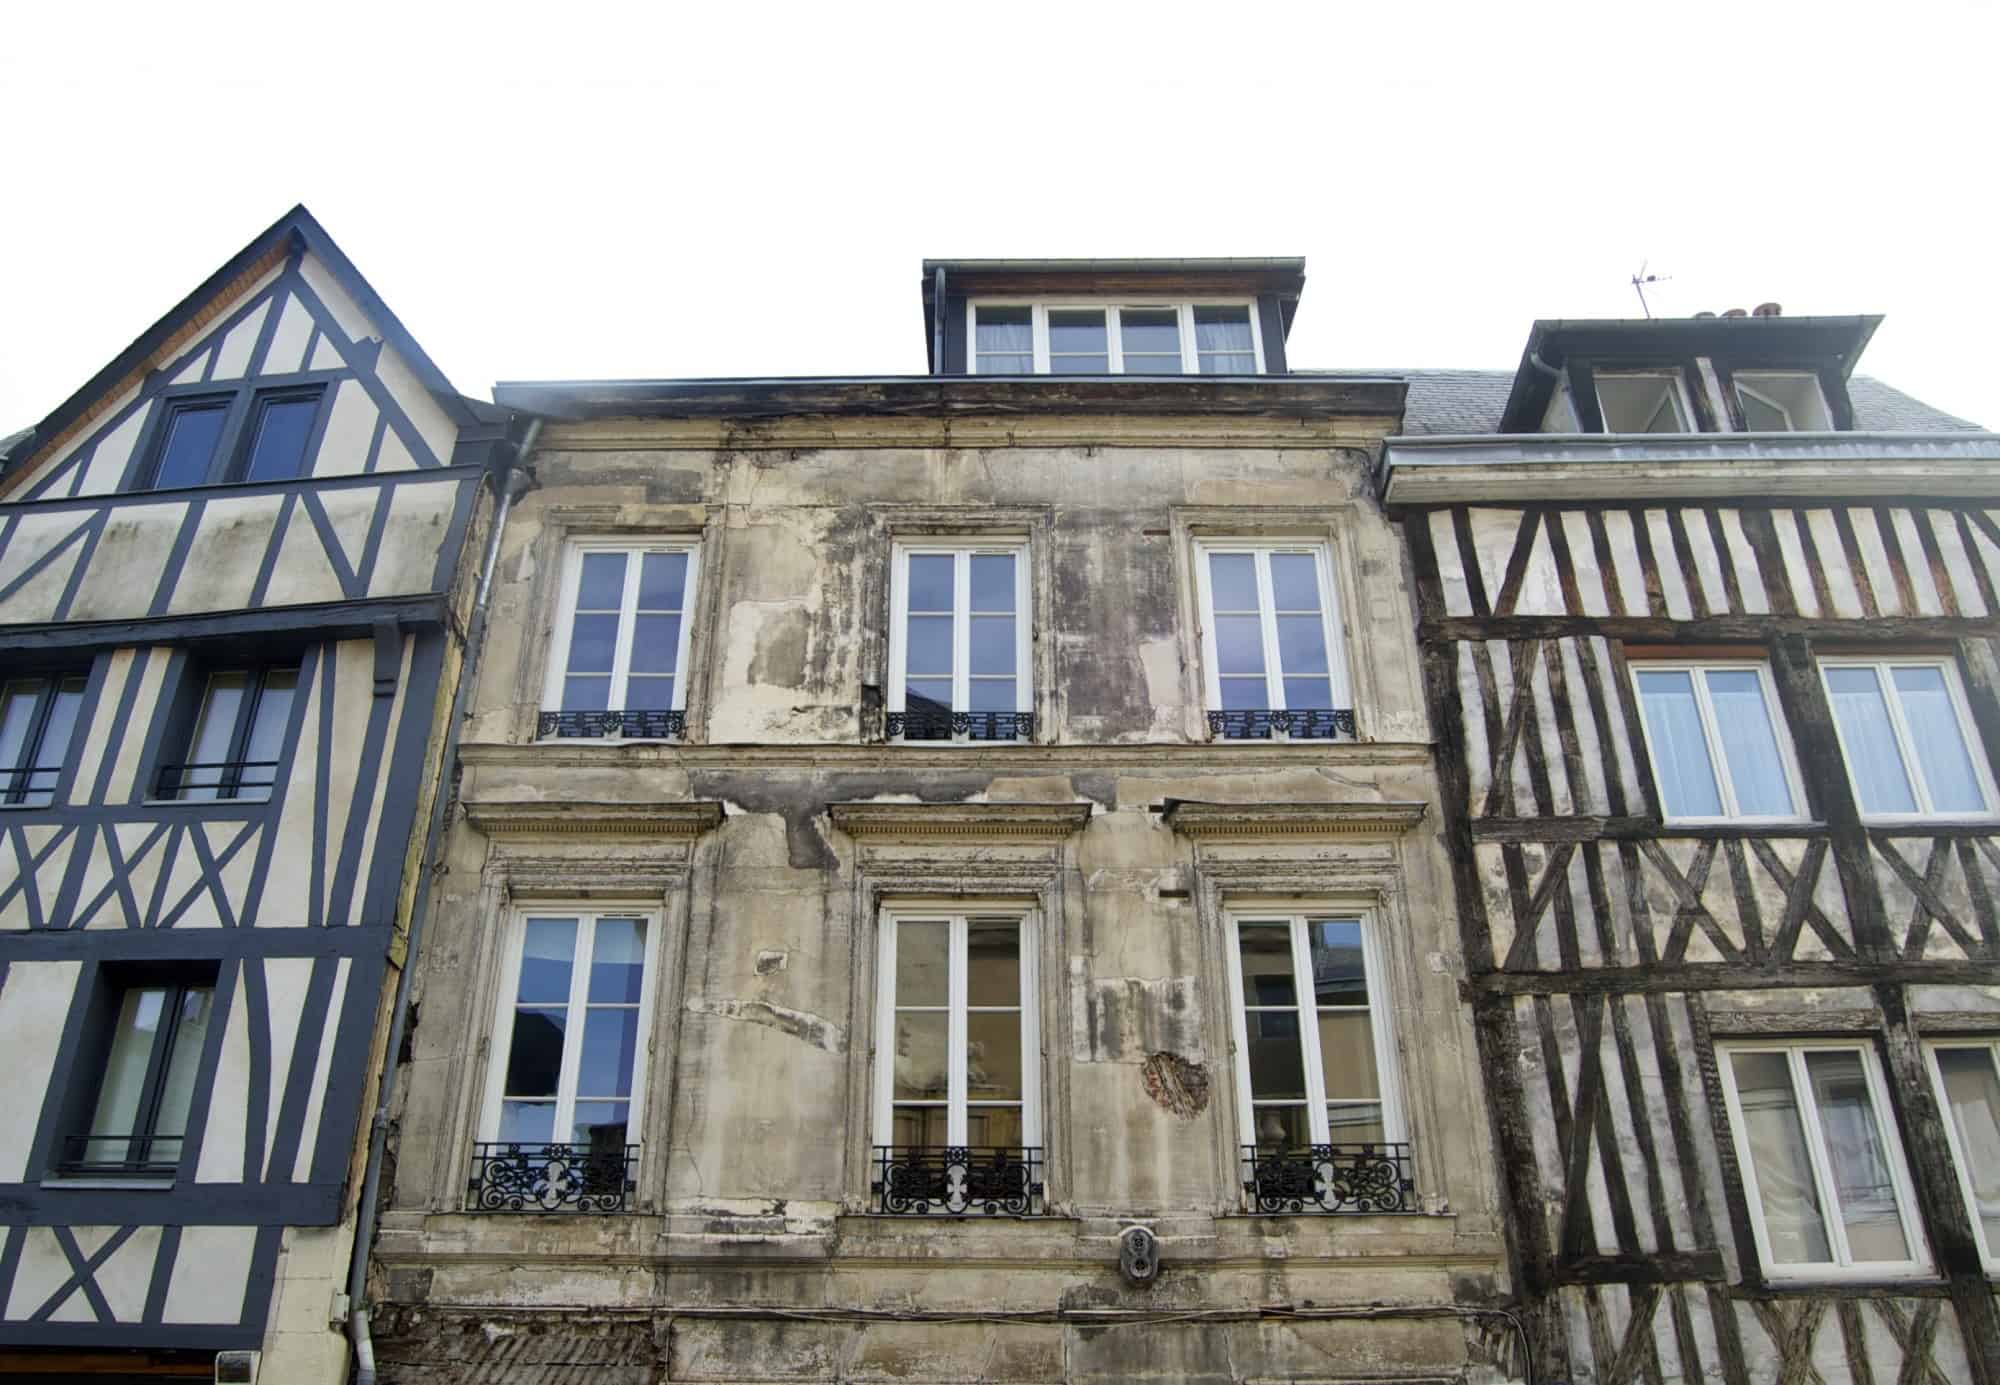 A weekend jaunt through the rustic streets of Rouen.